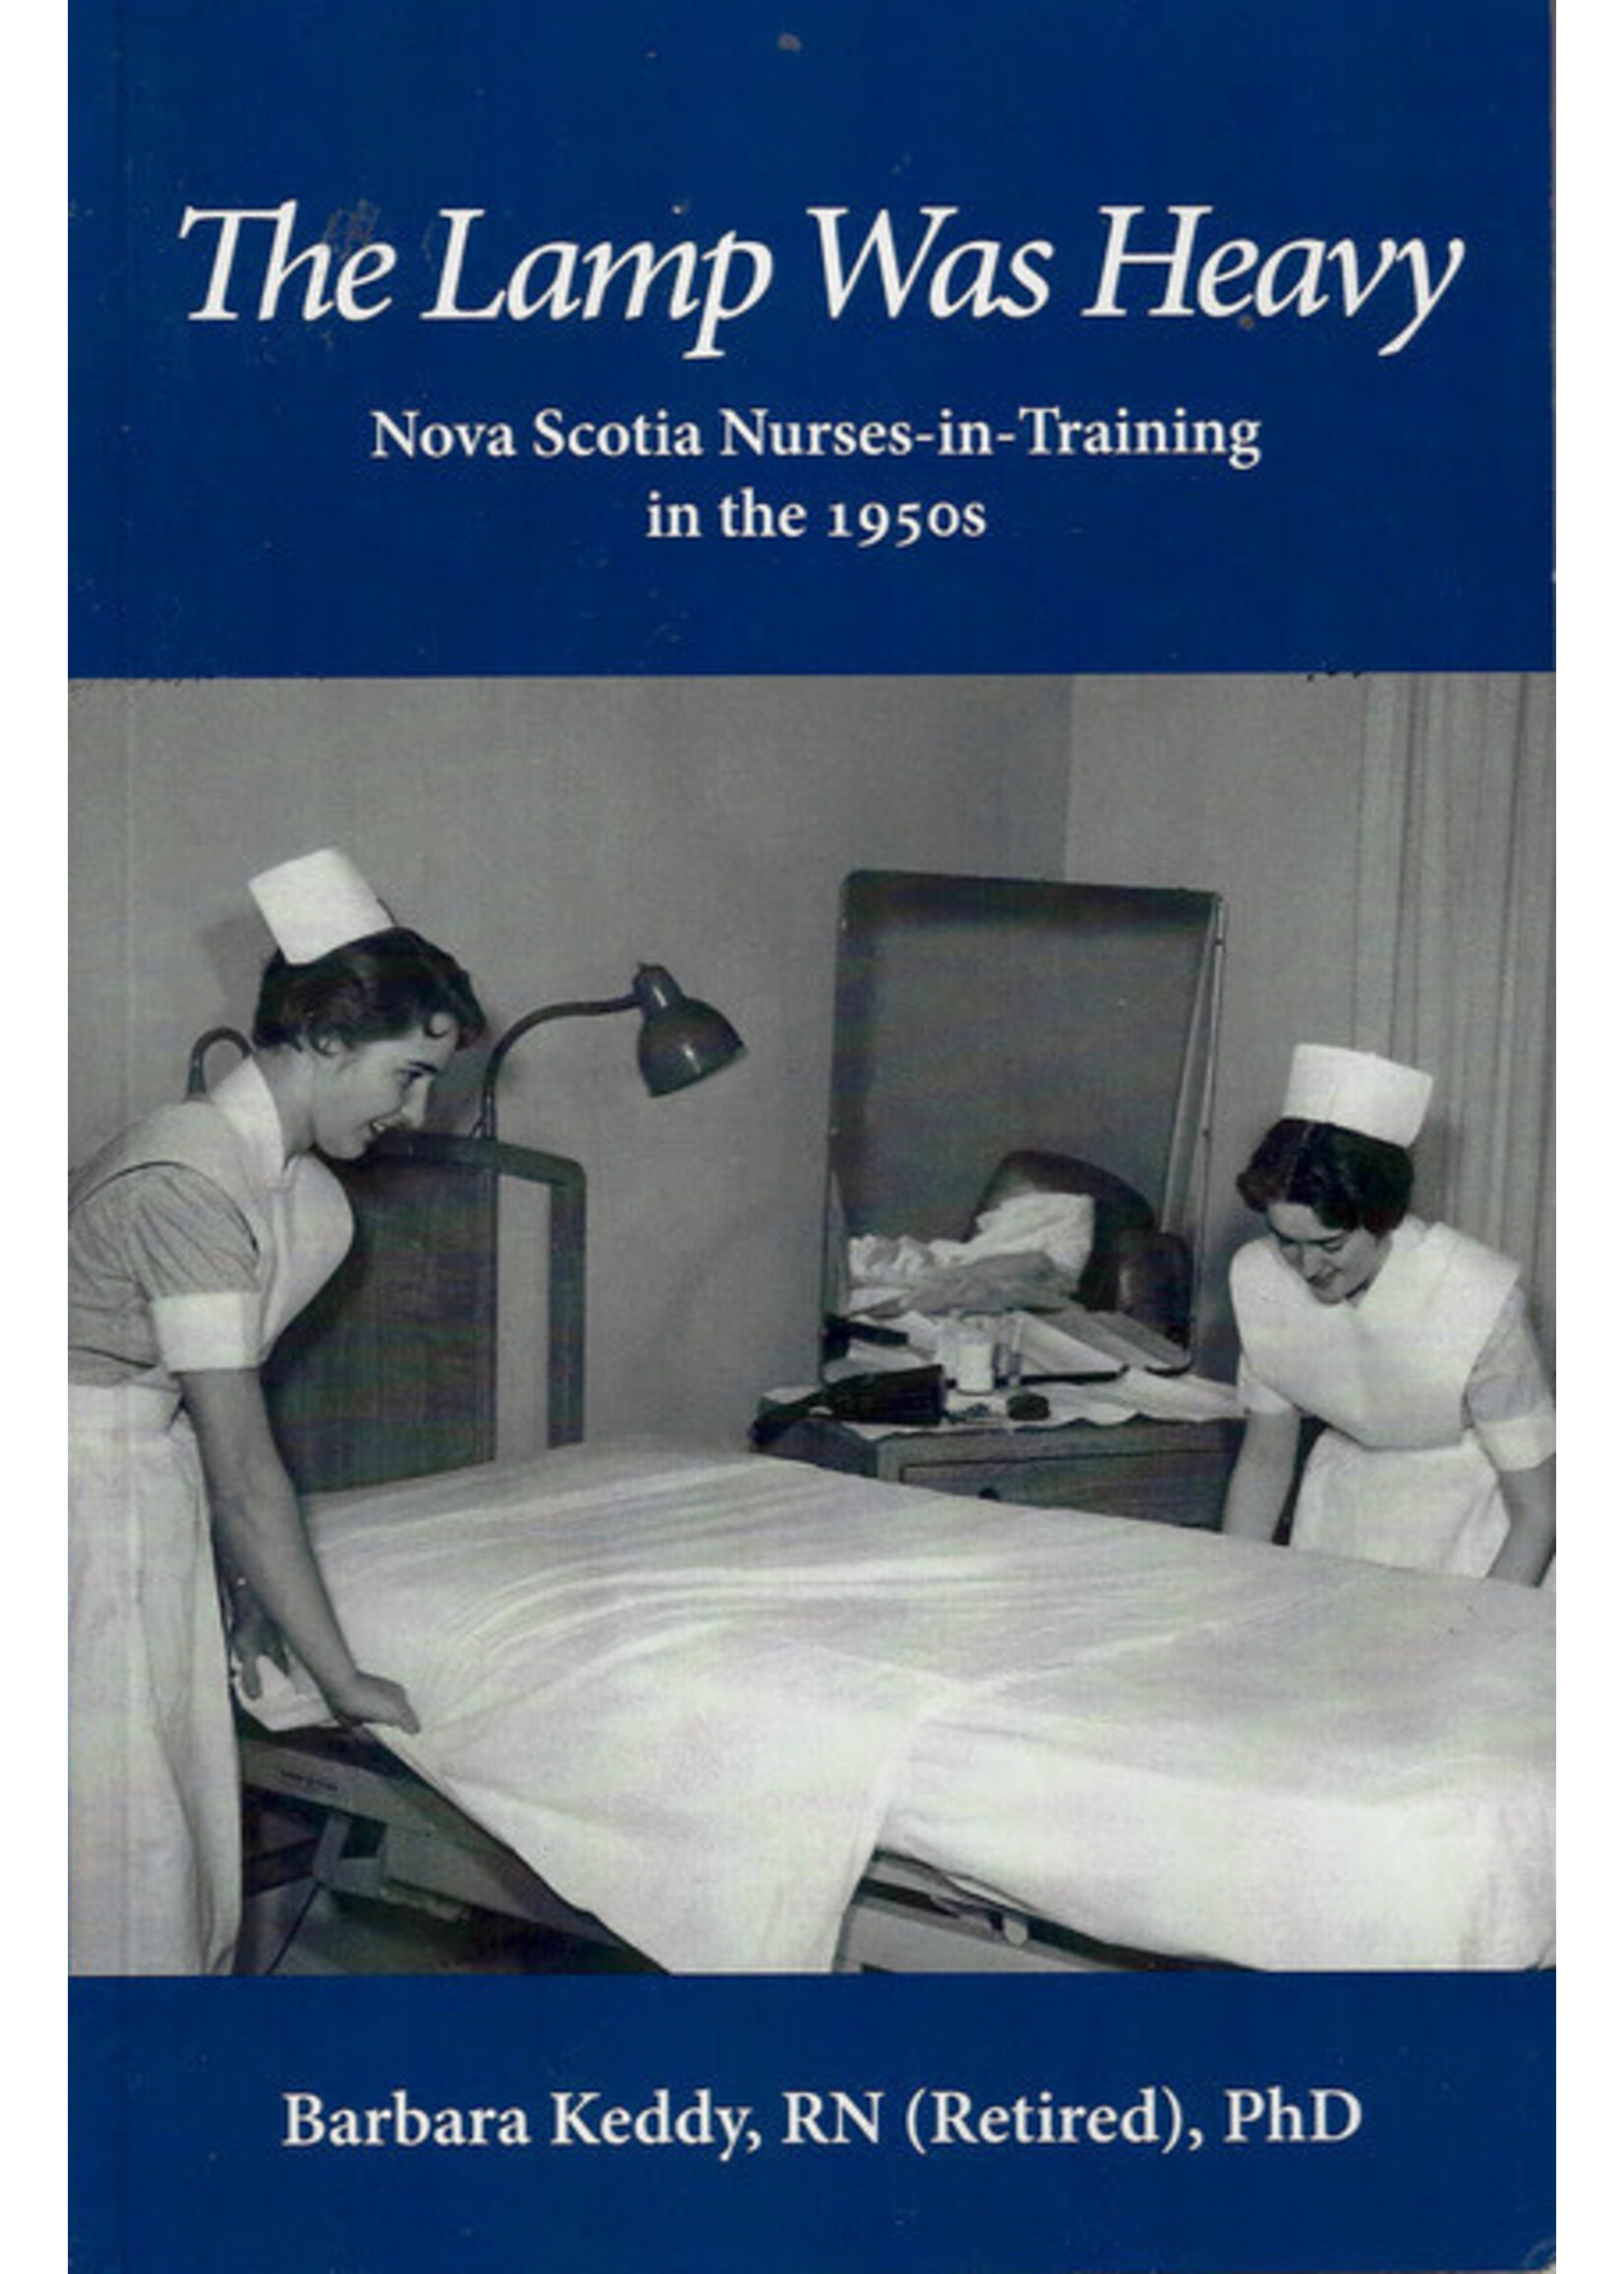 The Lamp Was Heavy: Nova Scotia nurses-in-training in the 1950s by Barbara Keddy